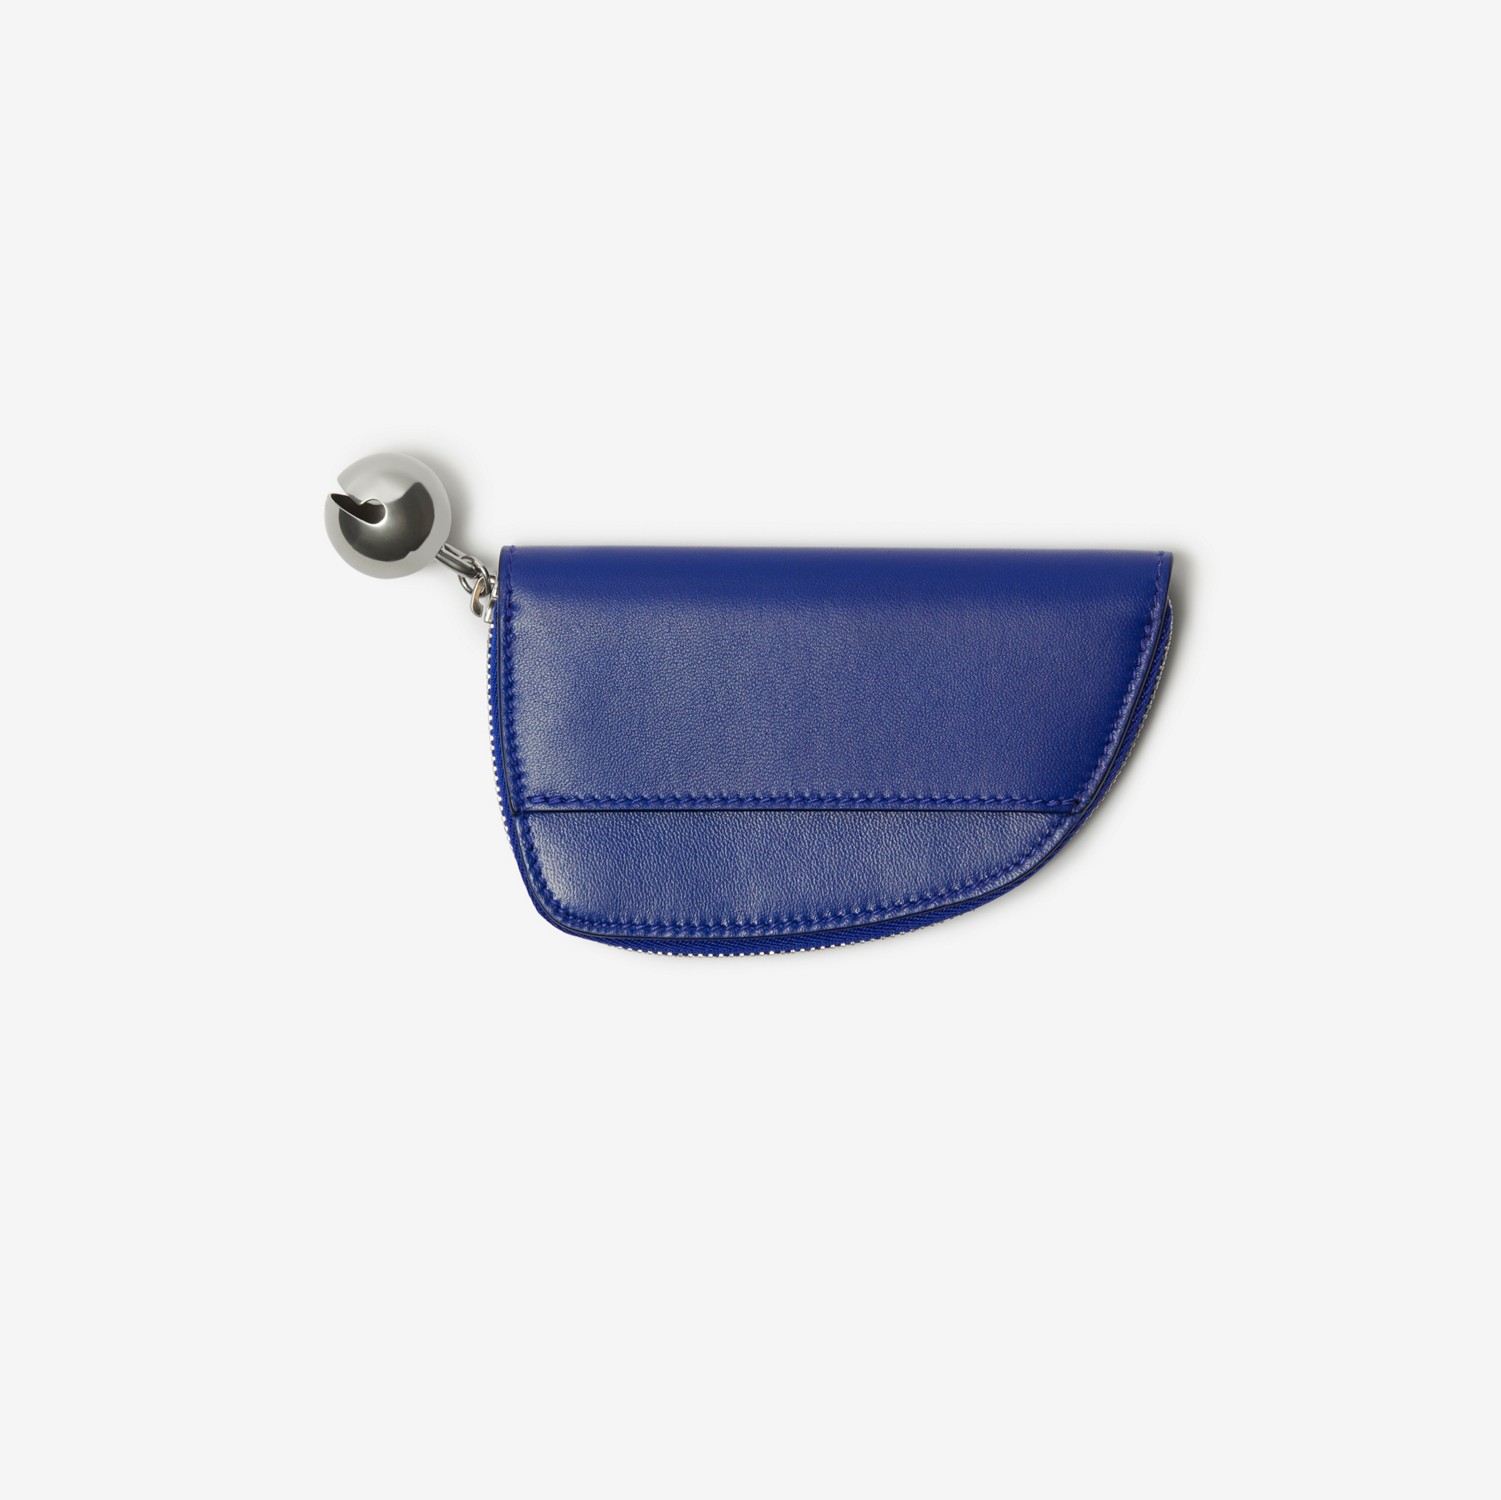 Shield Coin Pouch